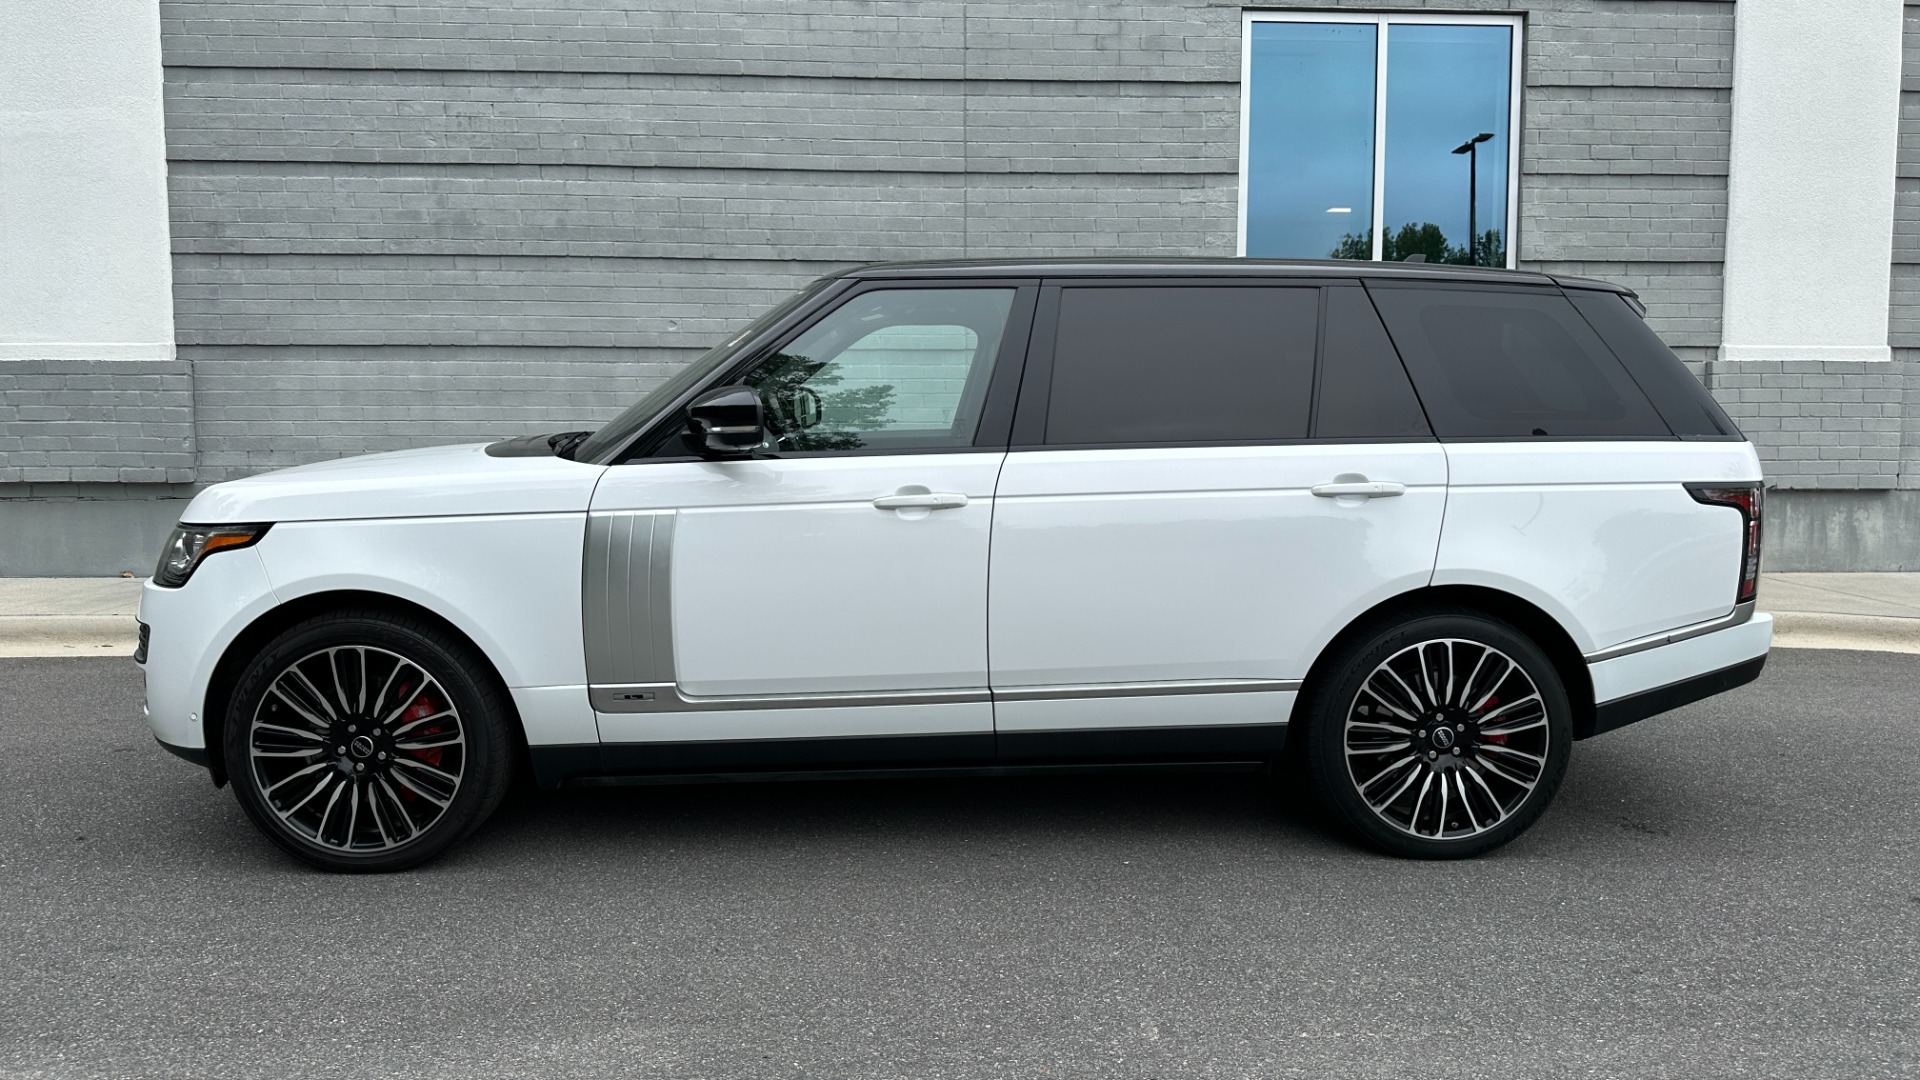 Used 2016 Land Rover Range Rover SUPERCHARGED 5.0 LWB / MERIDIAN / 22IN WHEELS / TOW PKG / CLIMATE PKG for sale $44,000 at Formula Imports in Charlotte NC 28227 3